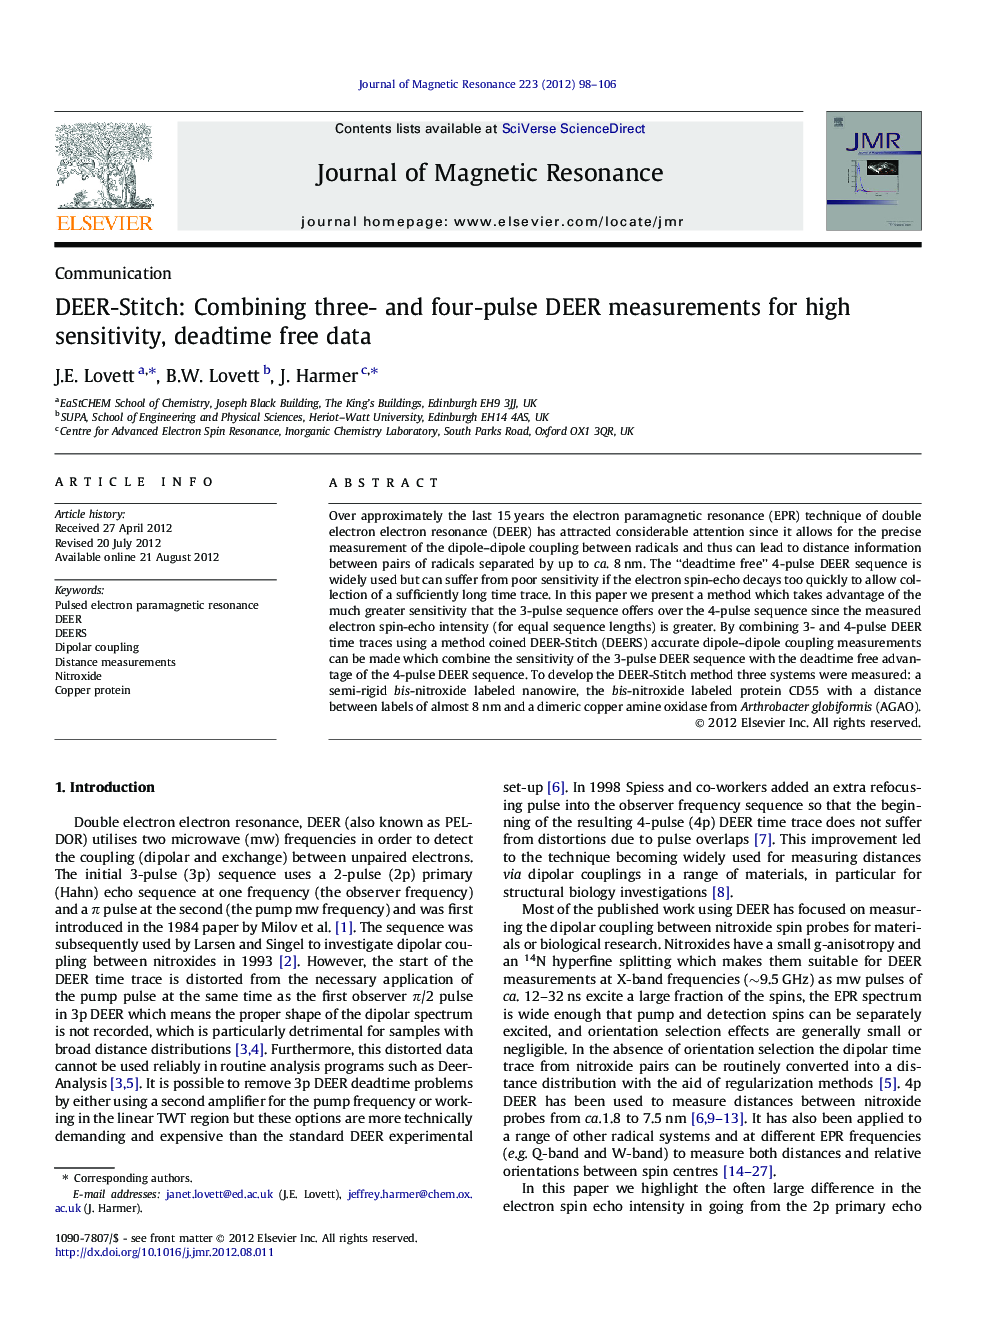 DEER-Stitch: Combining three- and four-pulse DEER measurements for high sensitivity, deadtime free data